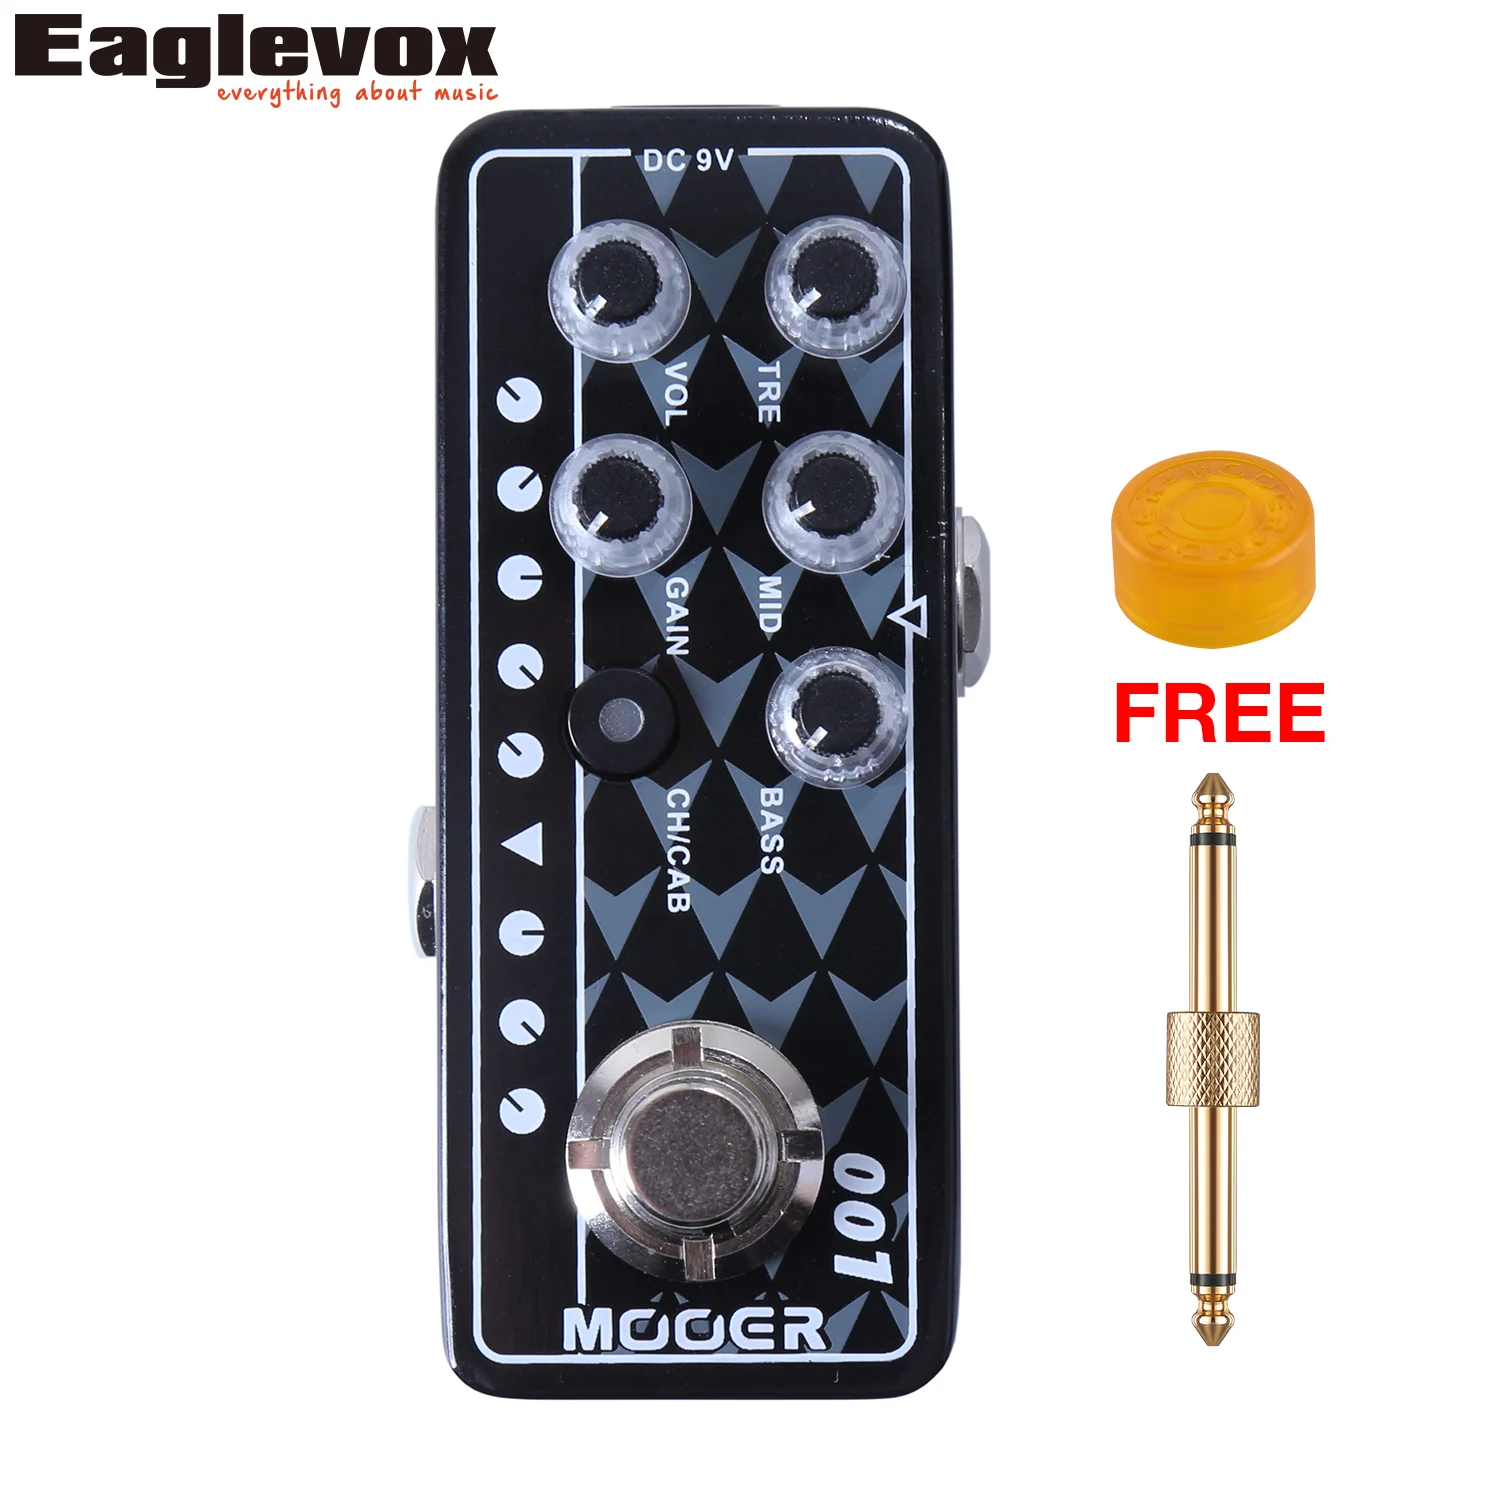 Mooer 001 Gas Station Micro Preamp 3 band EQ Gain Volume Controls Dual Channel Guitar Effect Pedal with Free Gift